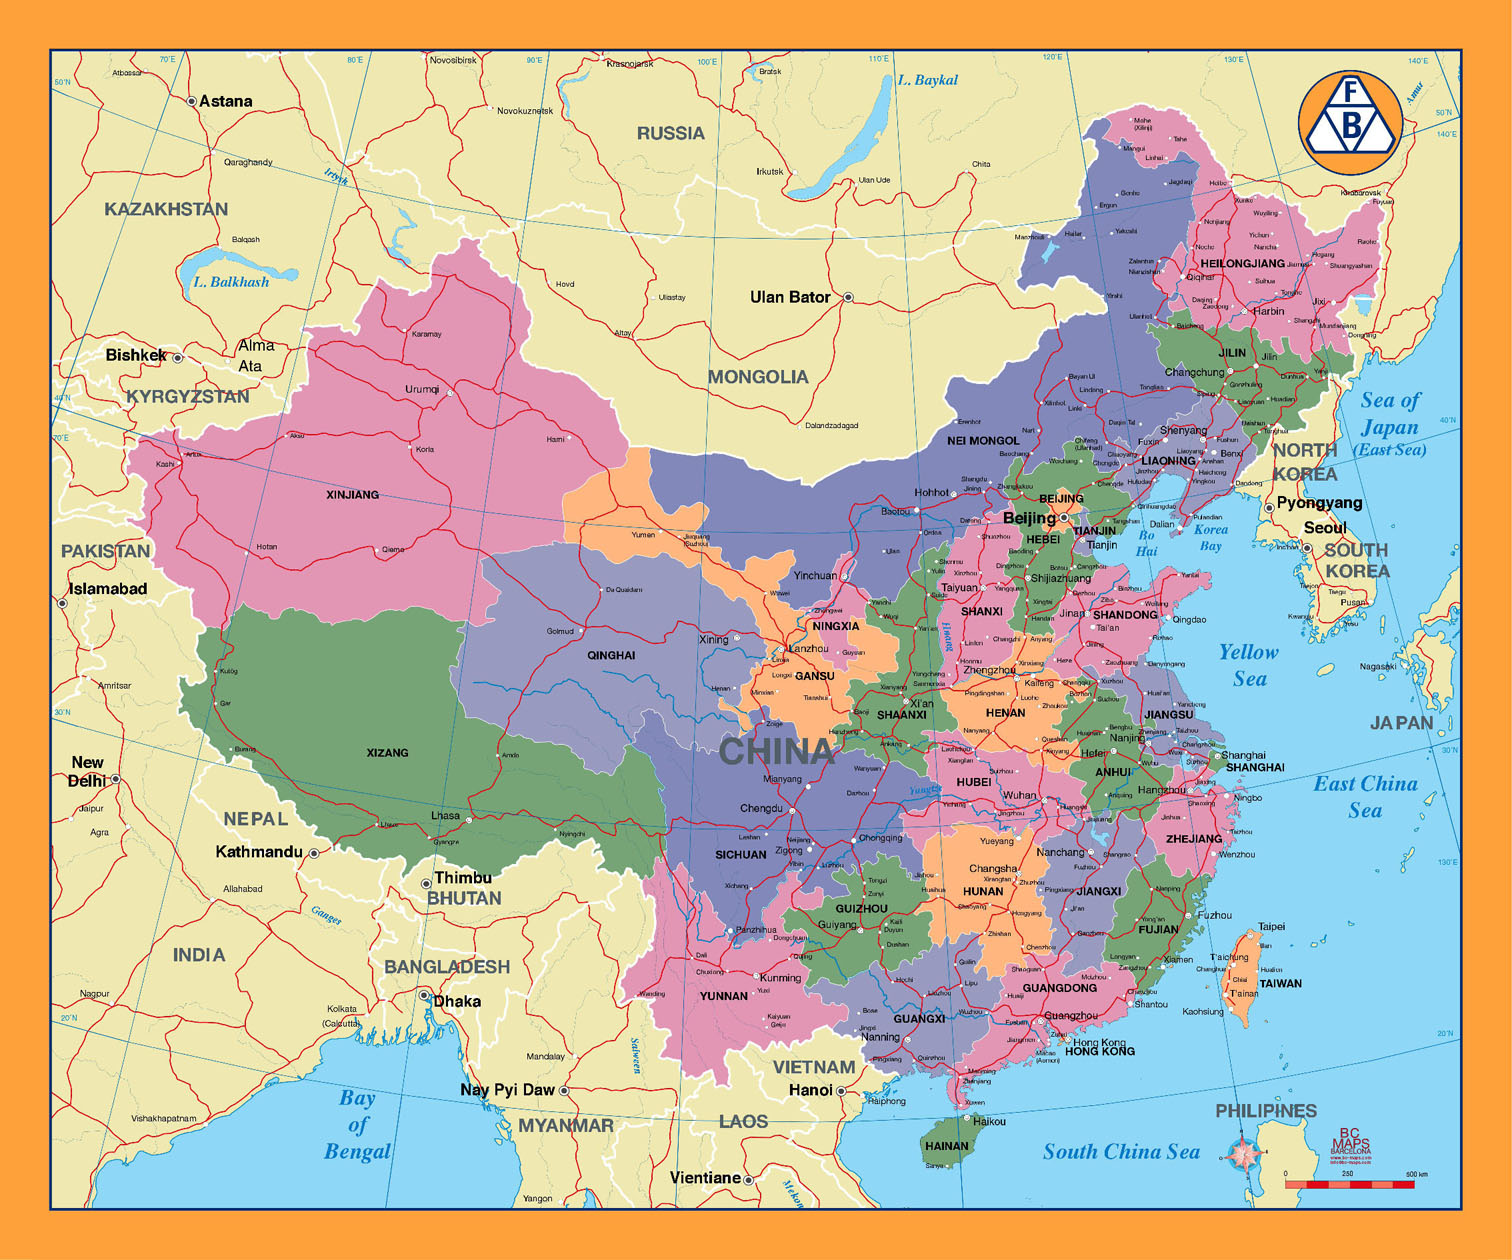 map of china provinces and cities 2020 China City Maps Maps Of Major Cities In China map of china provinces and cities